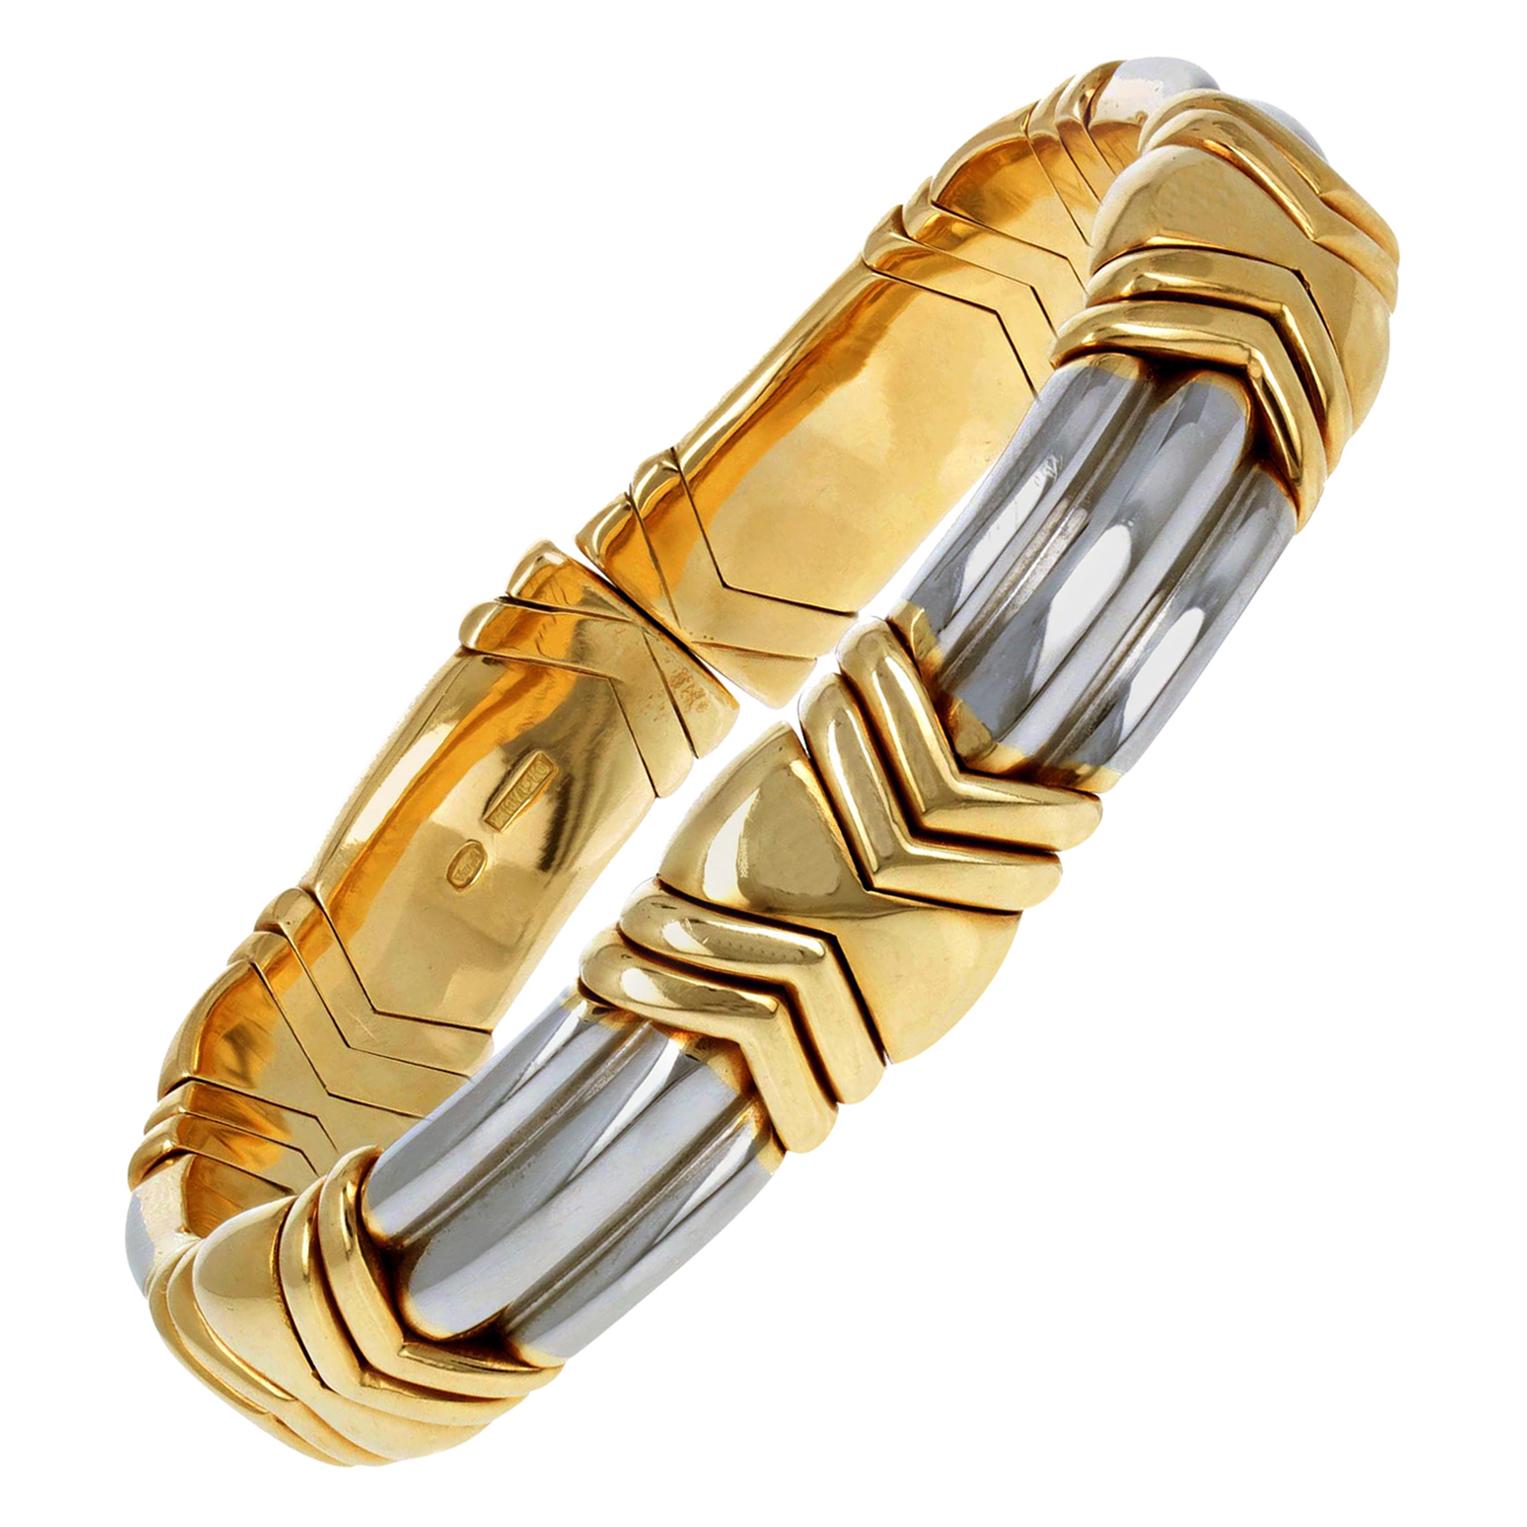 A bracelet of interlocking elements, mounted in steel and 18k yellow gold, signed ‘Bulgari’, circa 1990. Flexible for opening the gap and slipping in your wrist. 

* Signed 'BVLGARI' 
* Italian hallmark with star, maker's registration number and